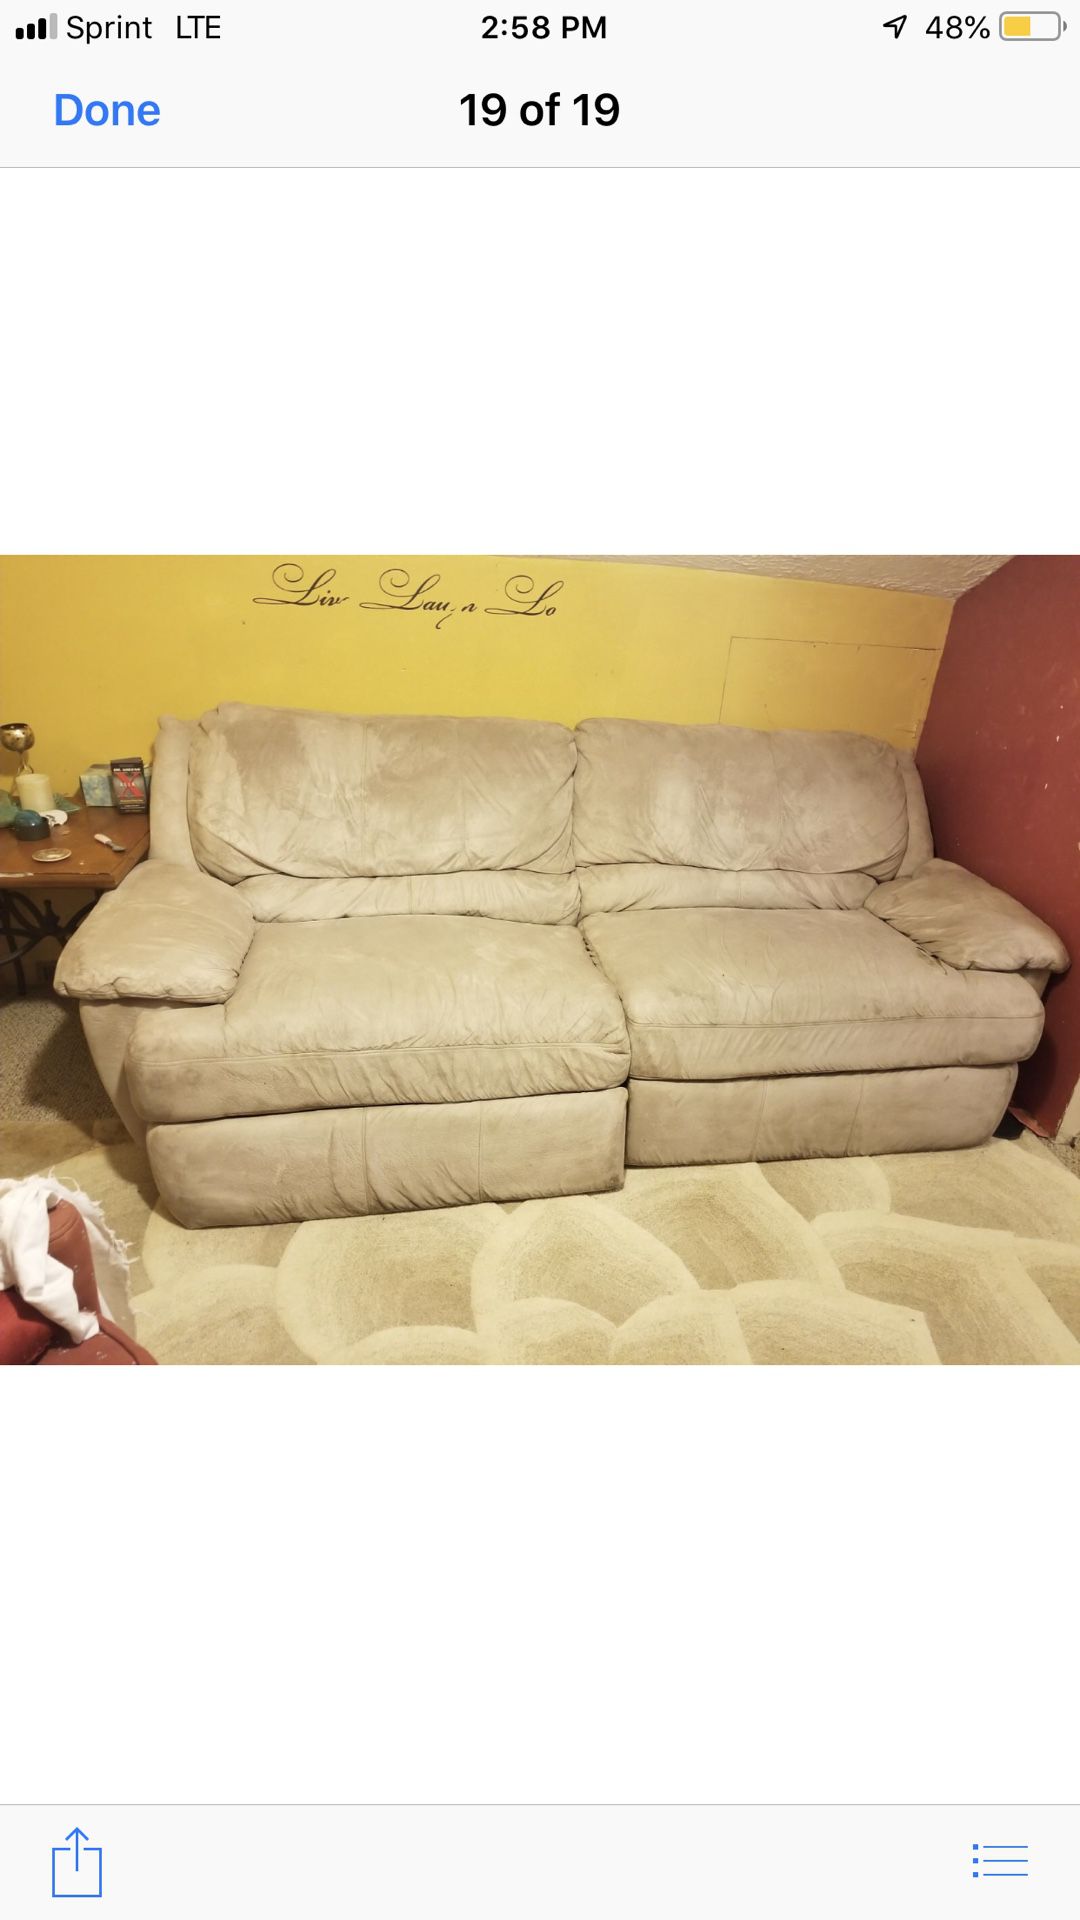 Creme color couch with electrical reclining on one side